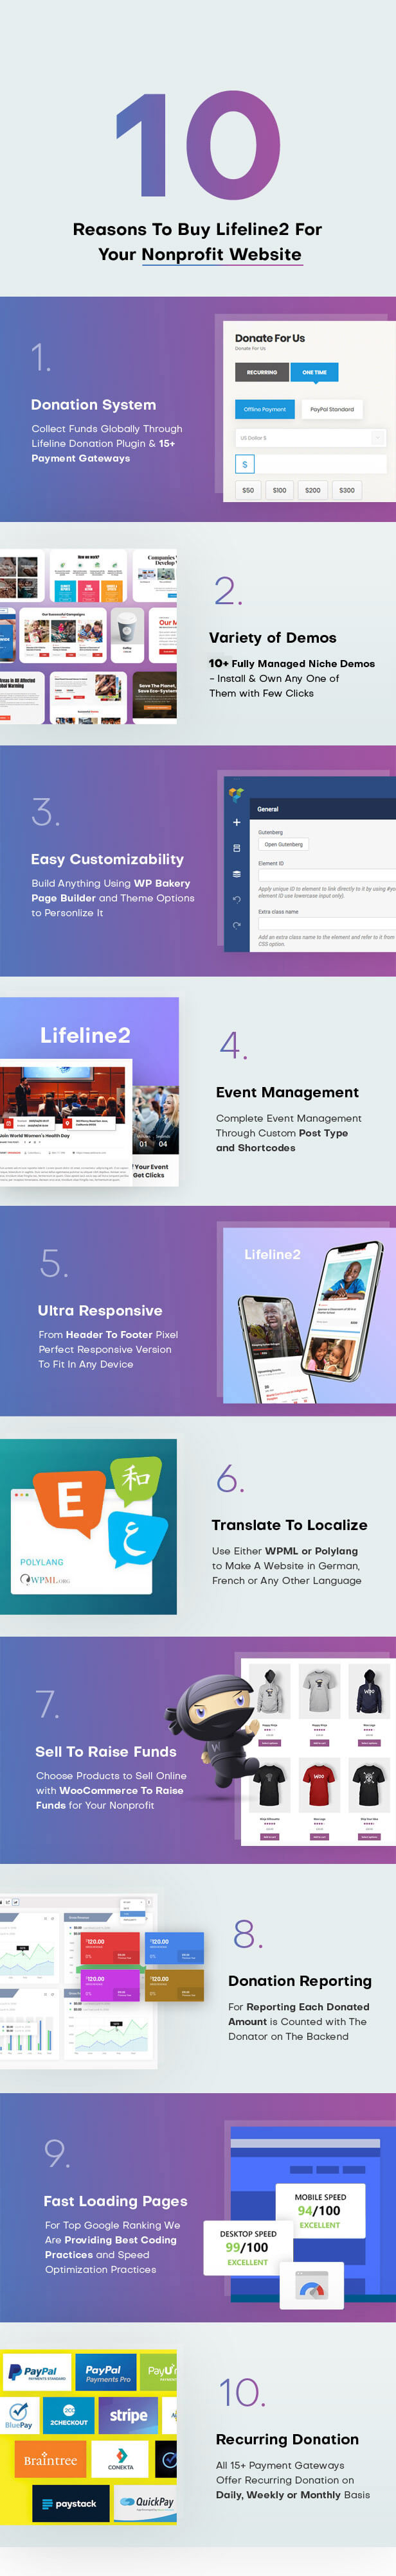 Lifeline 2 - An Ultimate Nonprofit WordPress Theme for Charity, Fundraising and NGO Organizations - 2